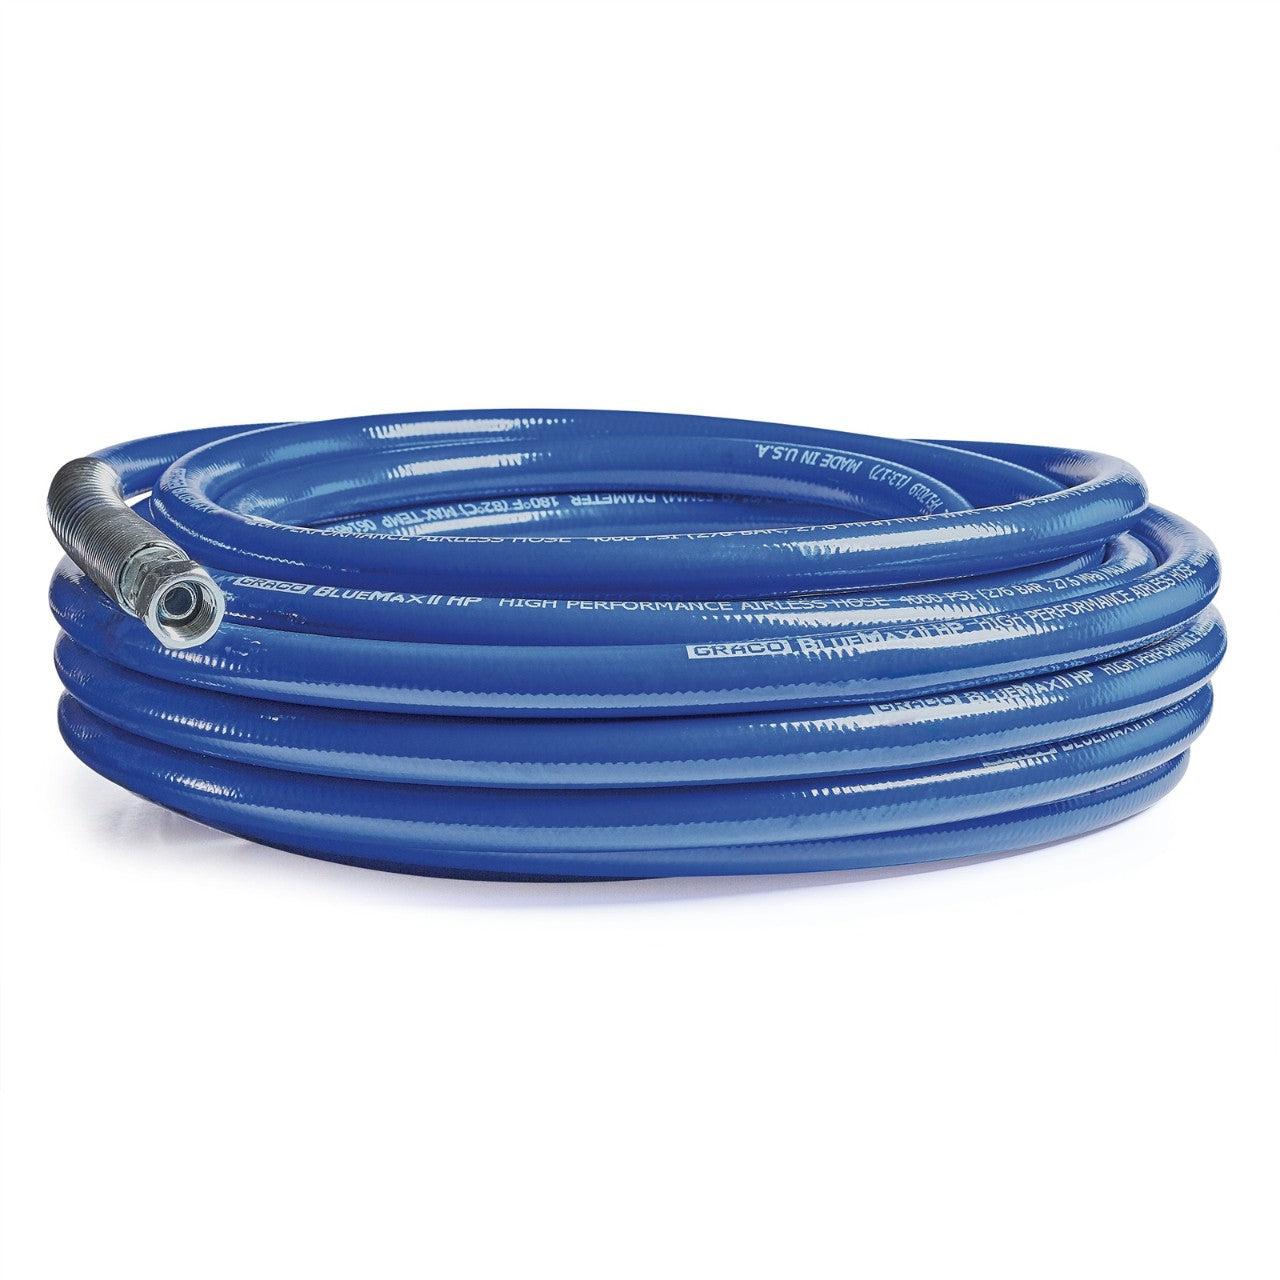 BlueMax II HP Airless Hose, 3/8 in x 50 ft, 4000 psi